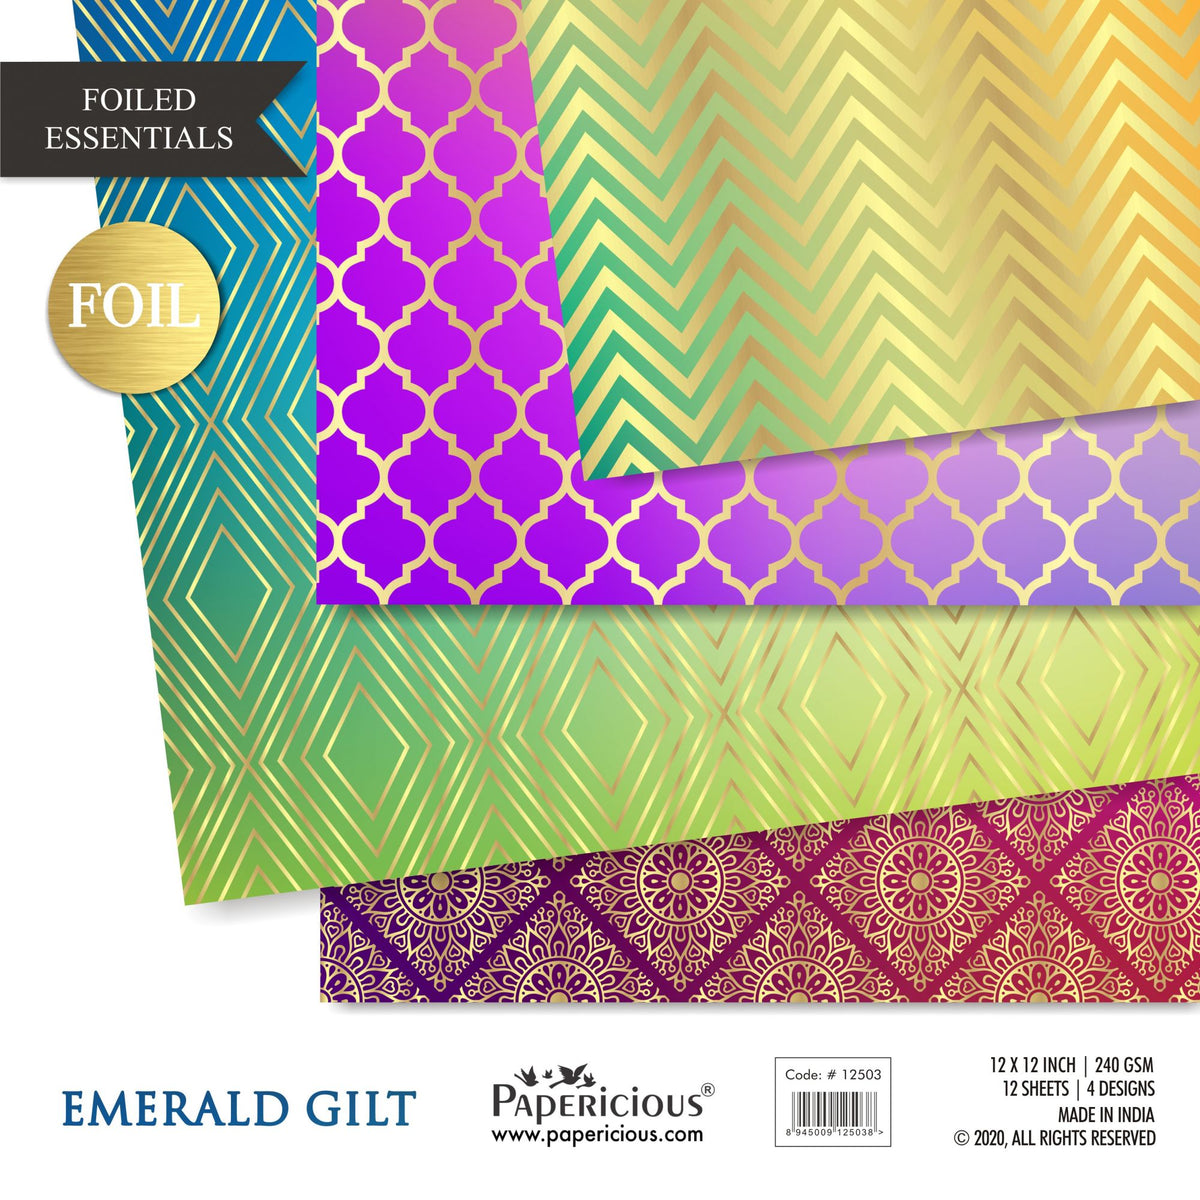 Papericious - Emerald Gilt - Golden Foiled Pattern Scrapbook Papers 12x12 inch / 12 sheets